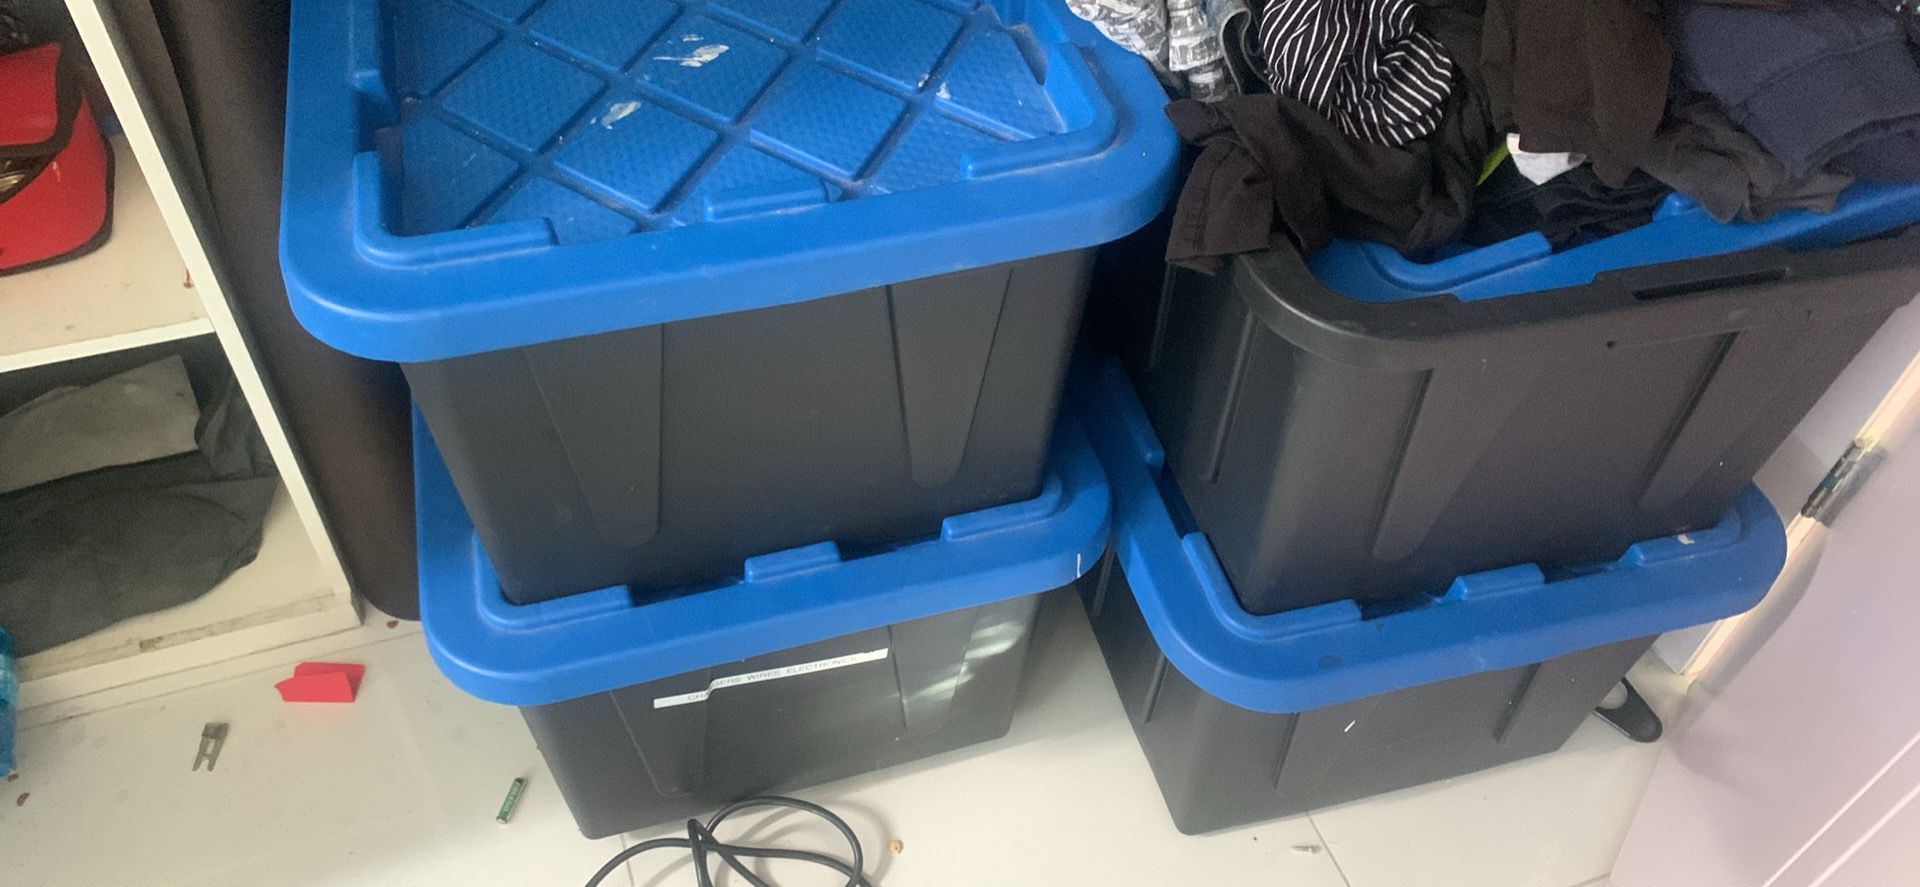 4 Large Storage Containers